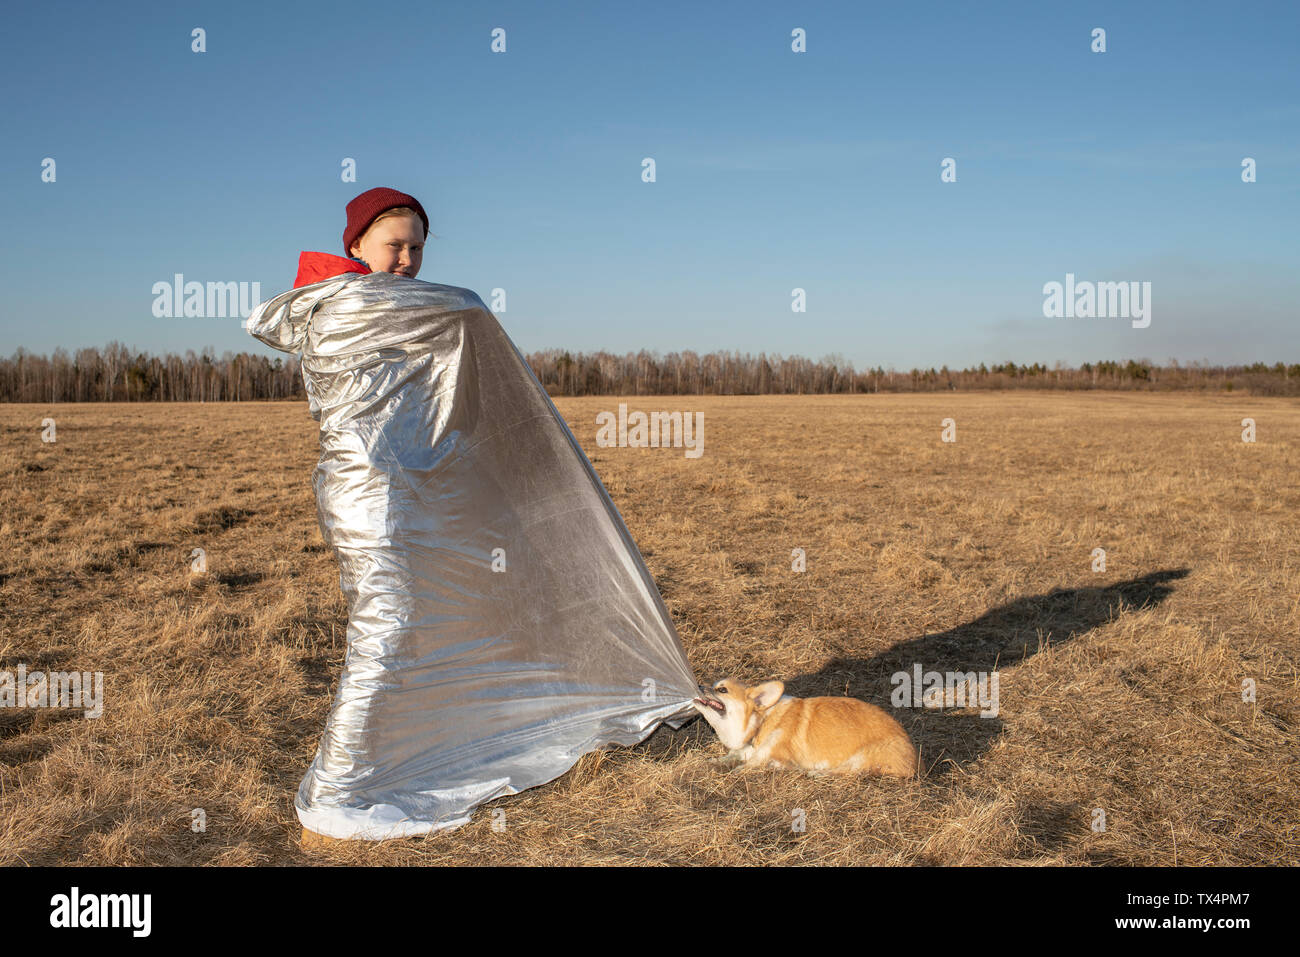 Boy wrapped up in superhero costume with dog in steppe landscape Stock Photo